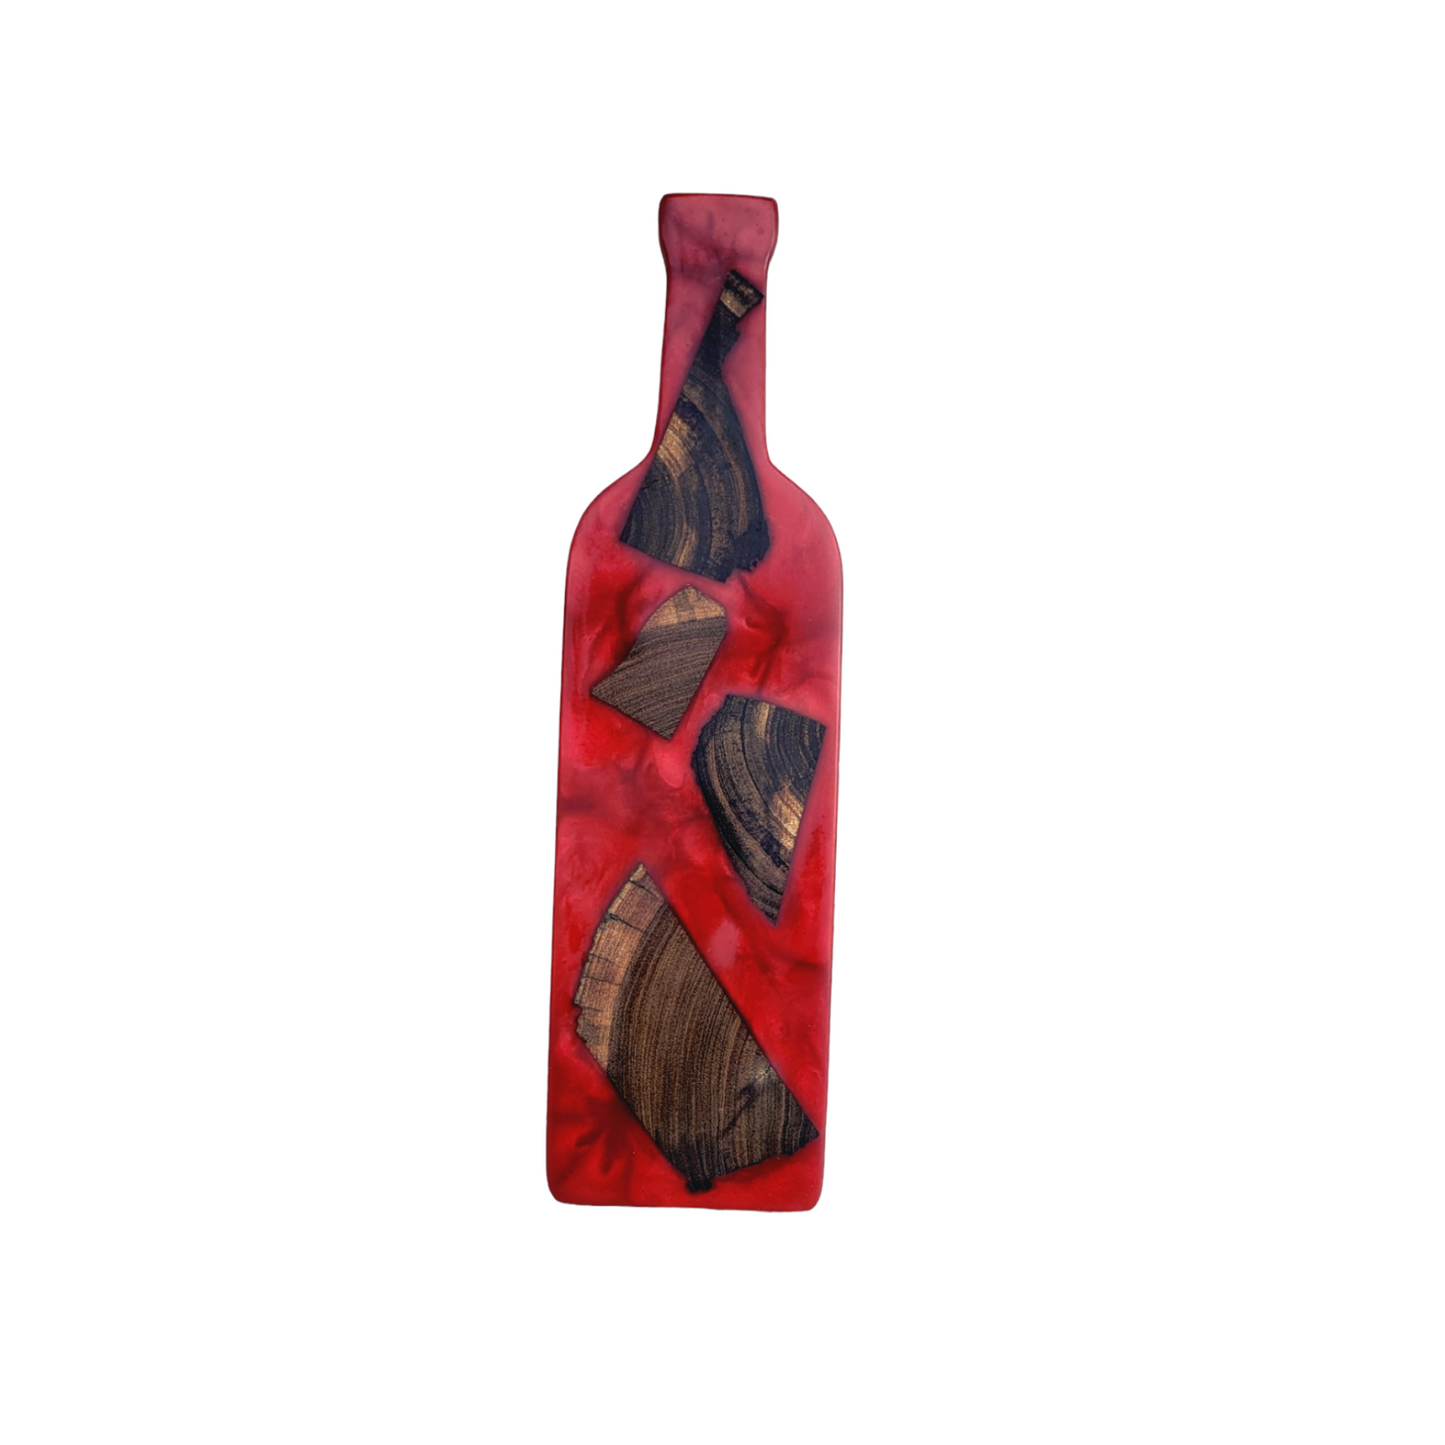 Wood And Epoxy Wine Bottle Serving Tray